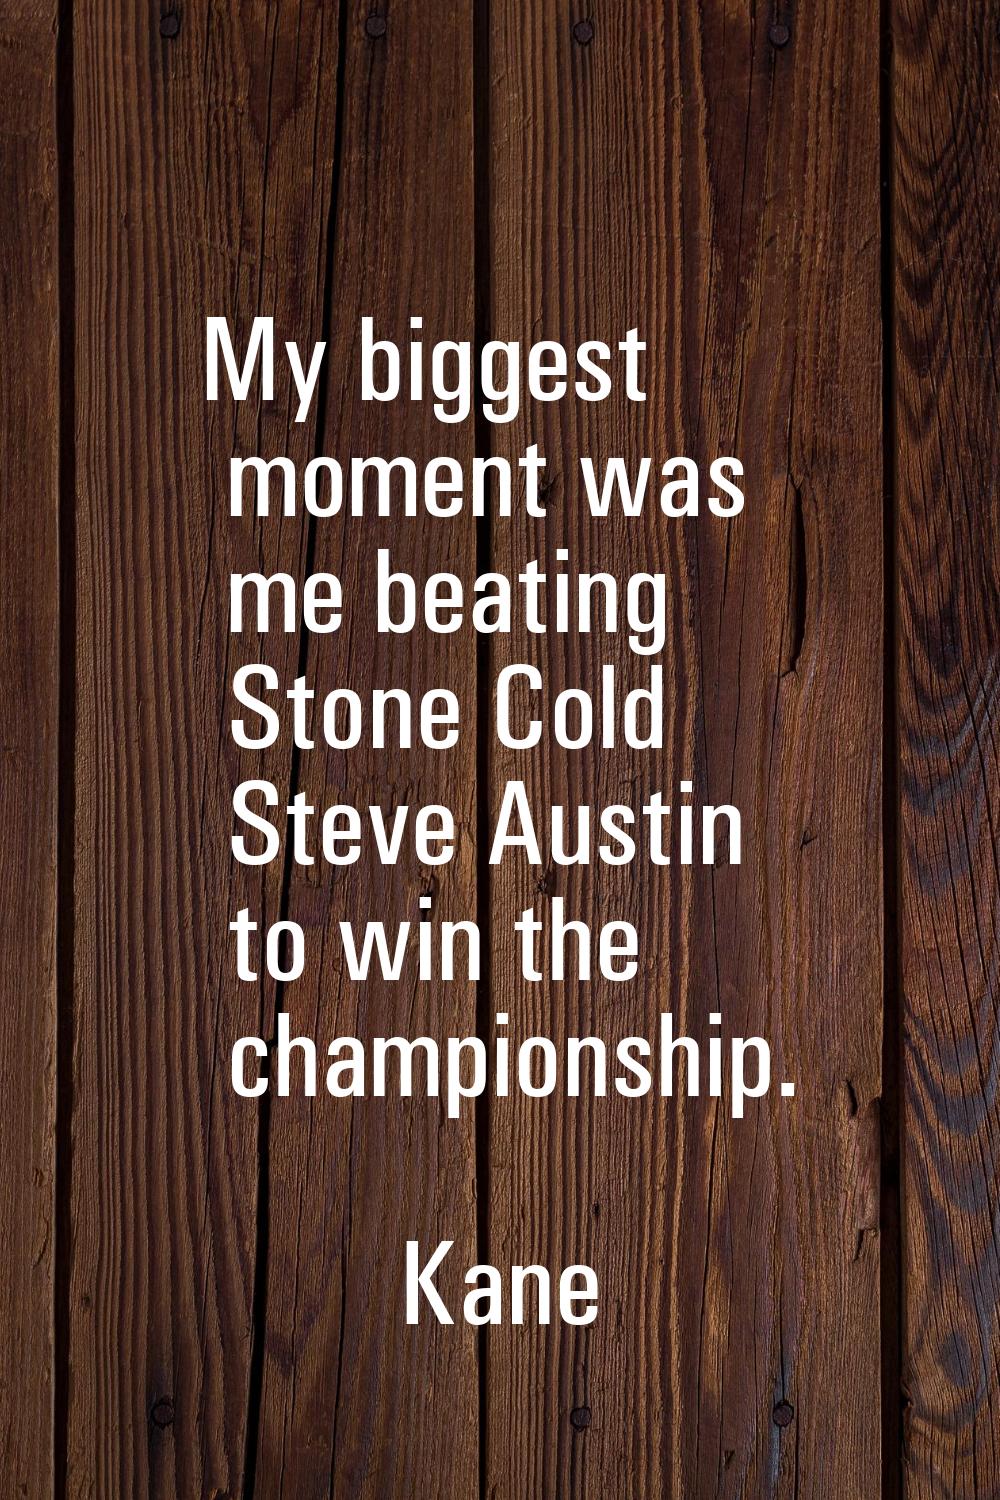 My biggest moment was me beating Stone Cold Steve Austin to win the championship.